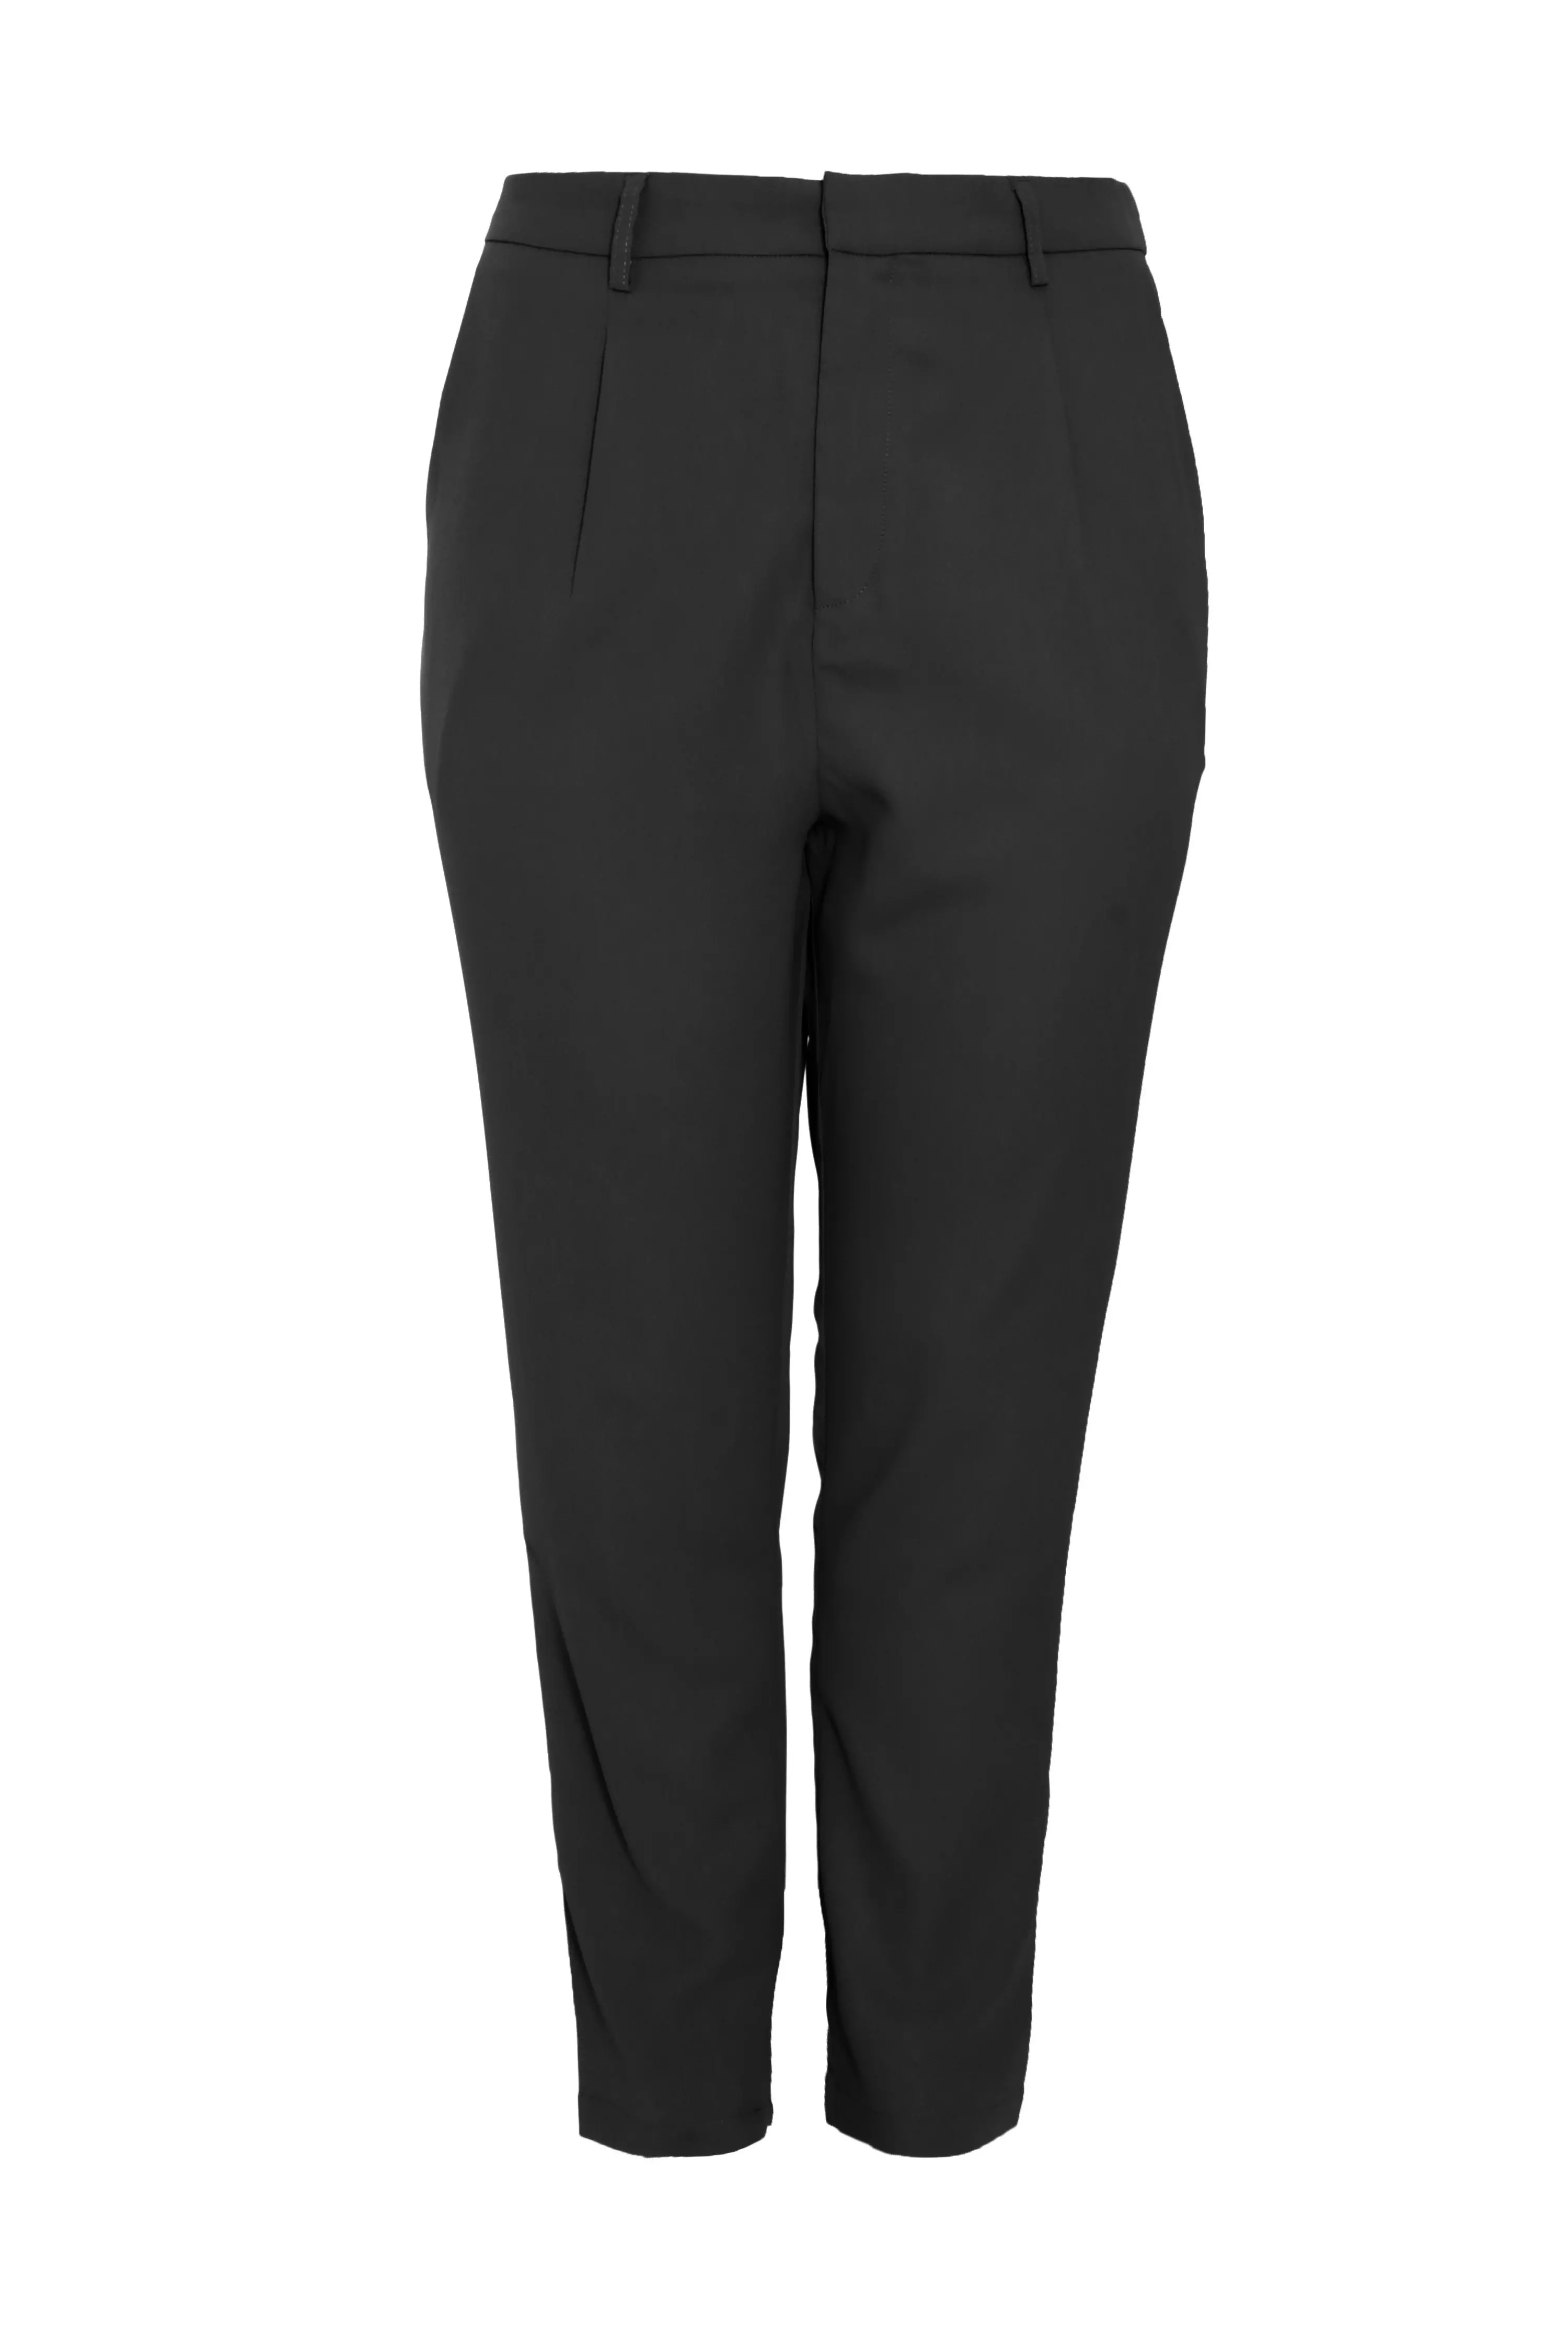 Curve Black Tailored Trousers